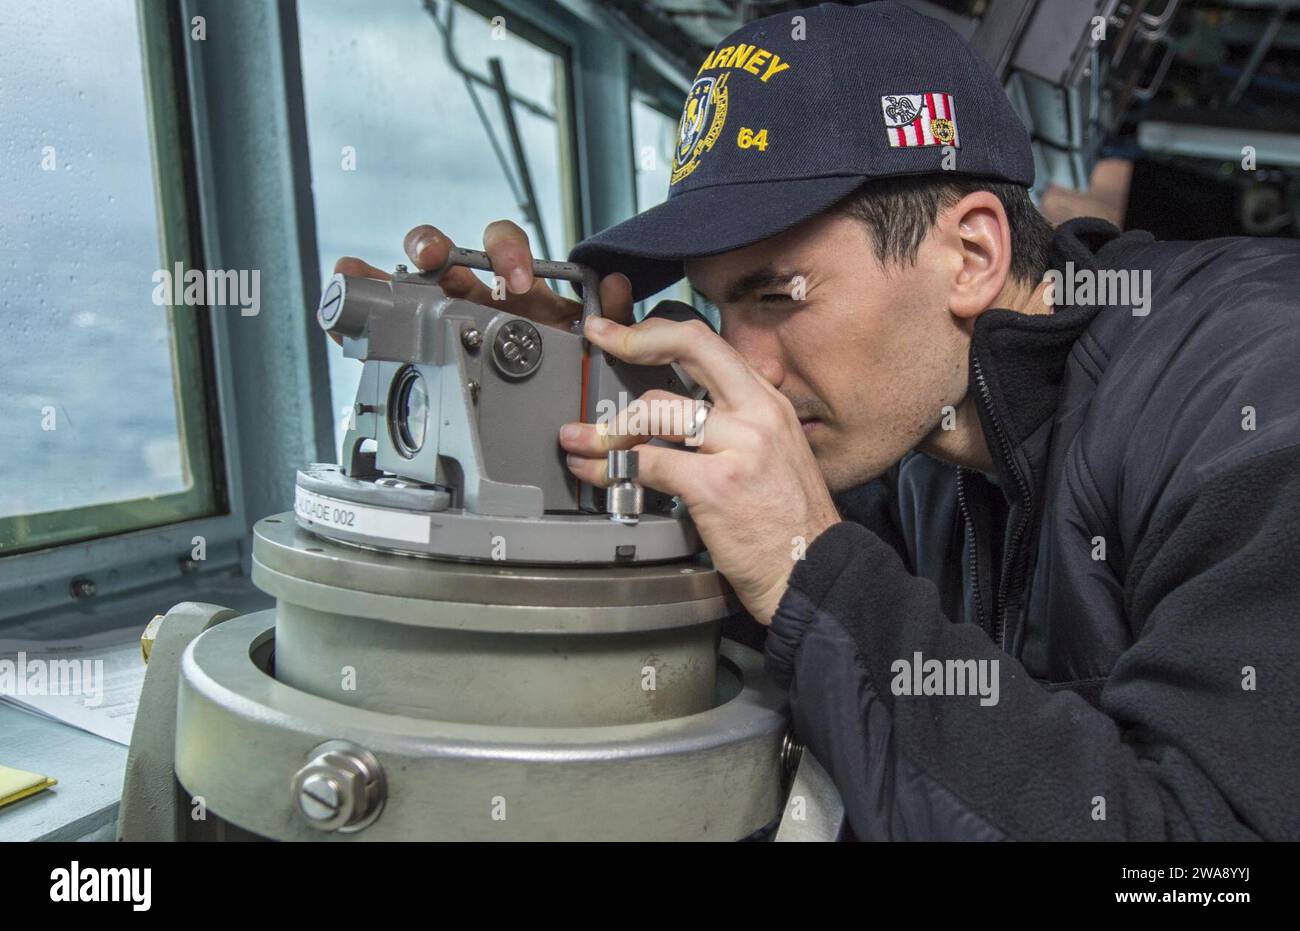 US military forces. 180104KA046-0062  AEGEAN SEA (Jan. 4, 2018) – Ensign Jordan Whittle takes a bearing through a telescopic alidade on the bridge of the Arleigh Burke-class guided-missile destroyer USS Carney (DDG 64) while underway in the Aegean Sea, Jan. 4, 2018. Carney, forward-deployed to Rota, Spain, is on its fourth patrol in the U.S. 6th Fleet area of operations in support of regional allies and partners, and U.S. national security interests in Europe. (U.S. Navy photo by Mass Communication Specialist 2nd Class James R. Turner/Released) Stock Photo